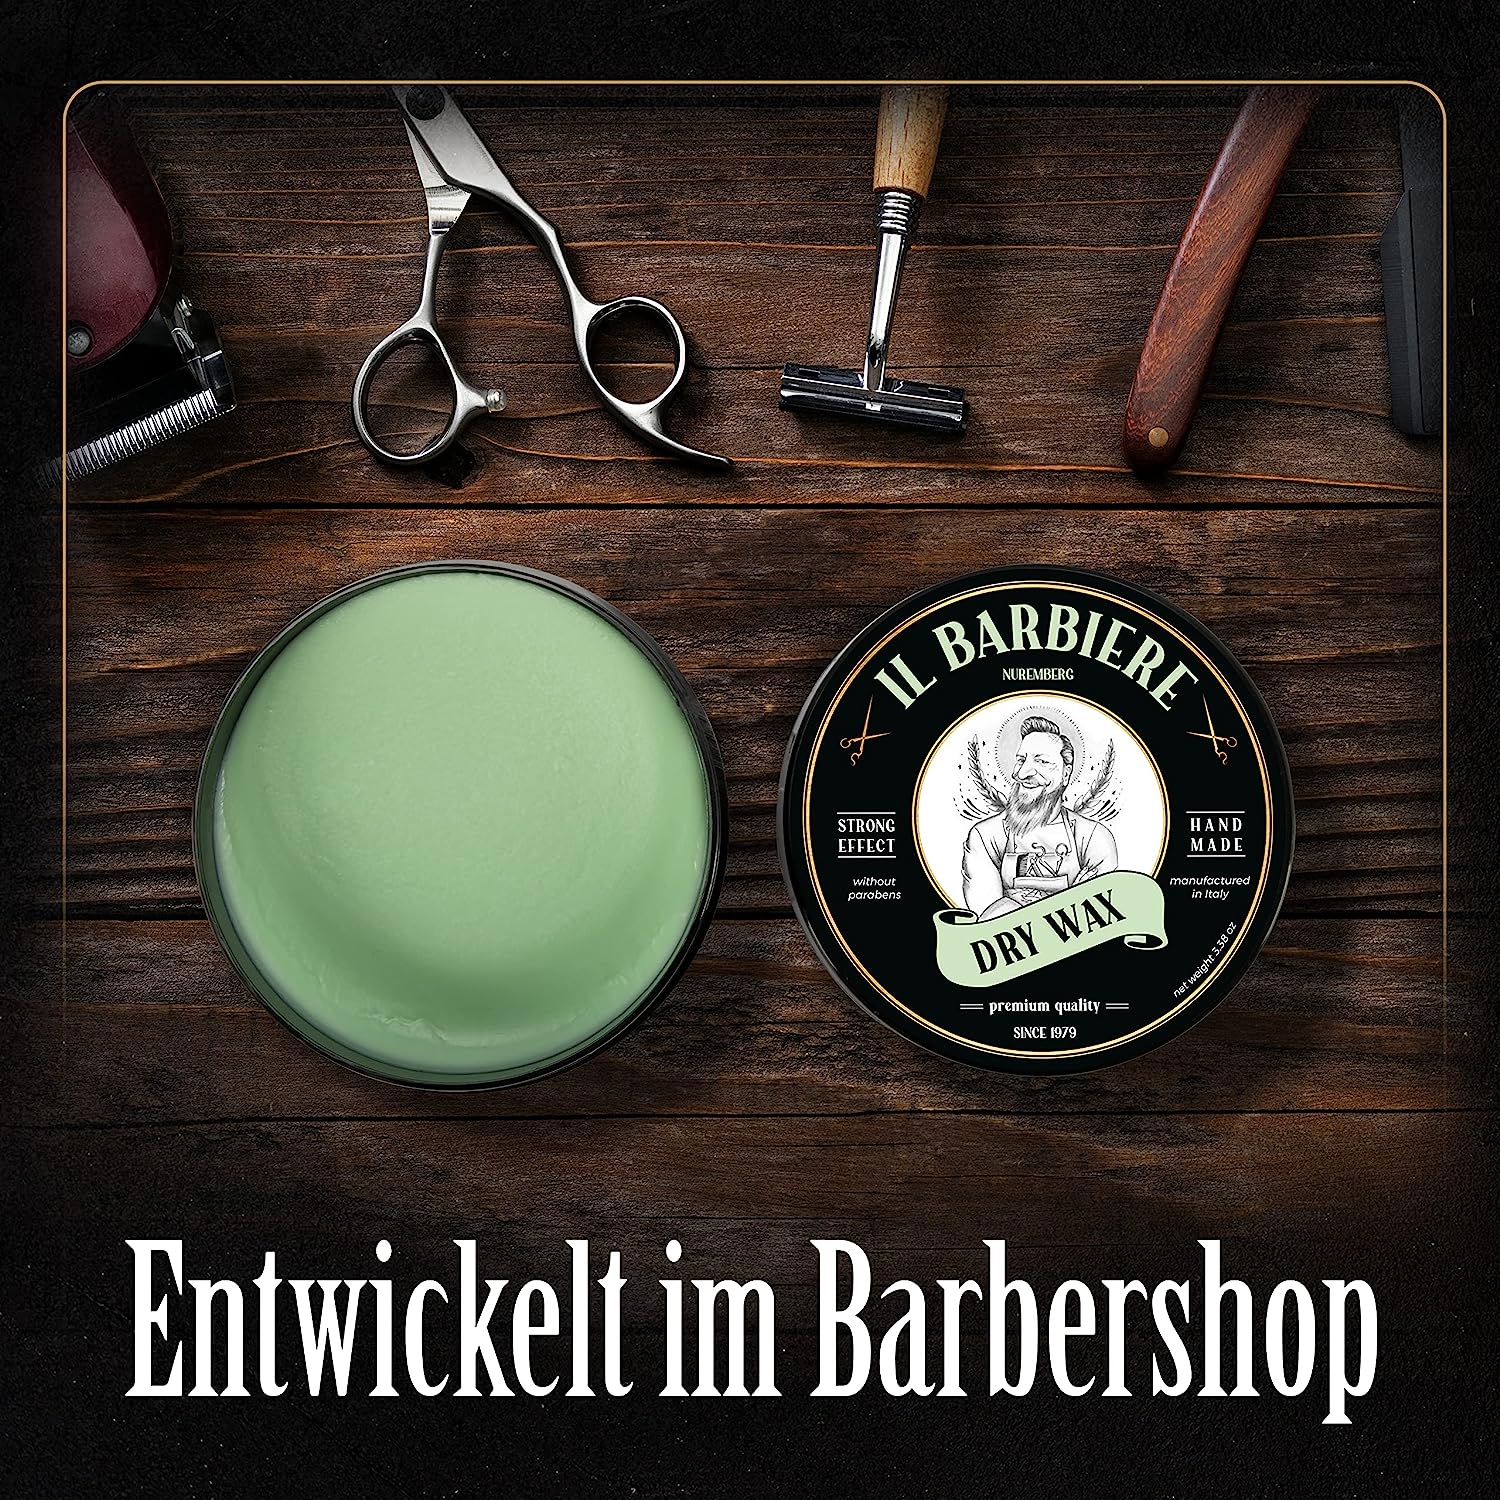 Il Barbiere® Dry Wax Pomade Water-Based - Natural Finish, Optimal Hold, Pomade Men\'s Hair Wax - No Parabens, Silicone-Free, Handmade for a Unique Look, 100 ml